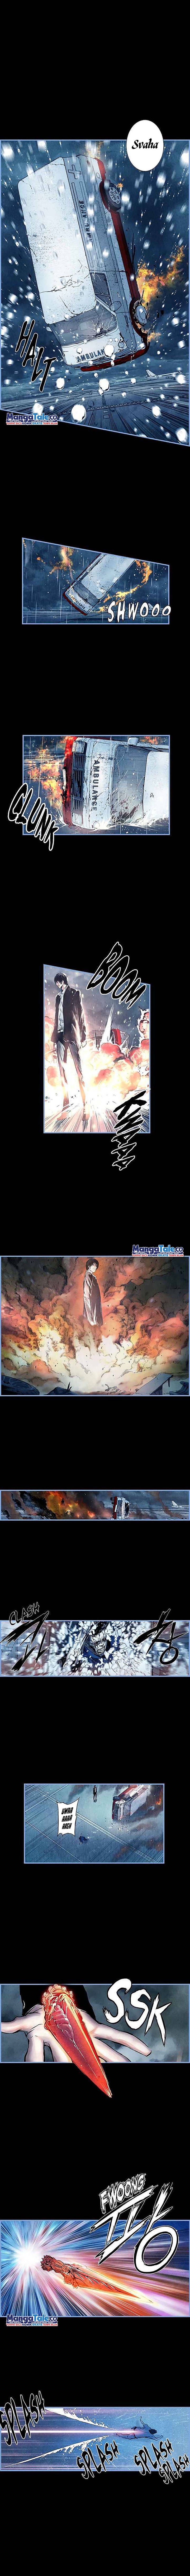 Island Part 2 Chapter 04 5